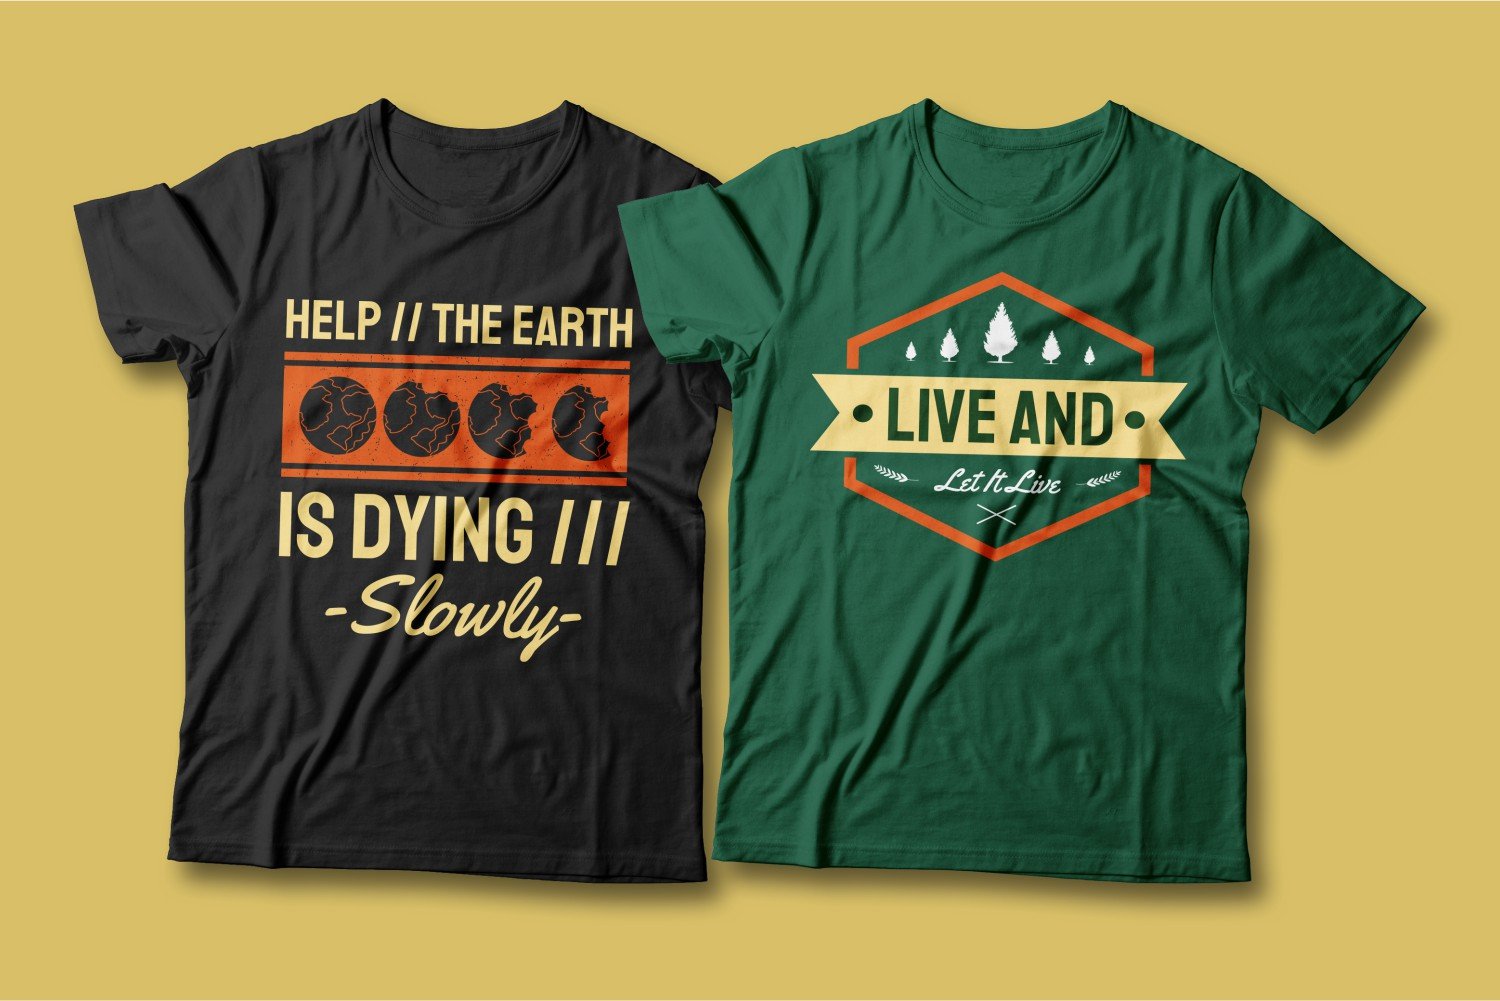 Two T-shirts - one black, the other green; both call for the preservation and protection of the environment.